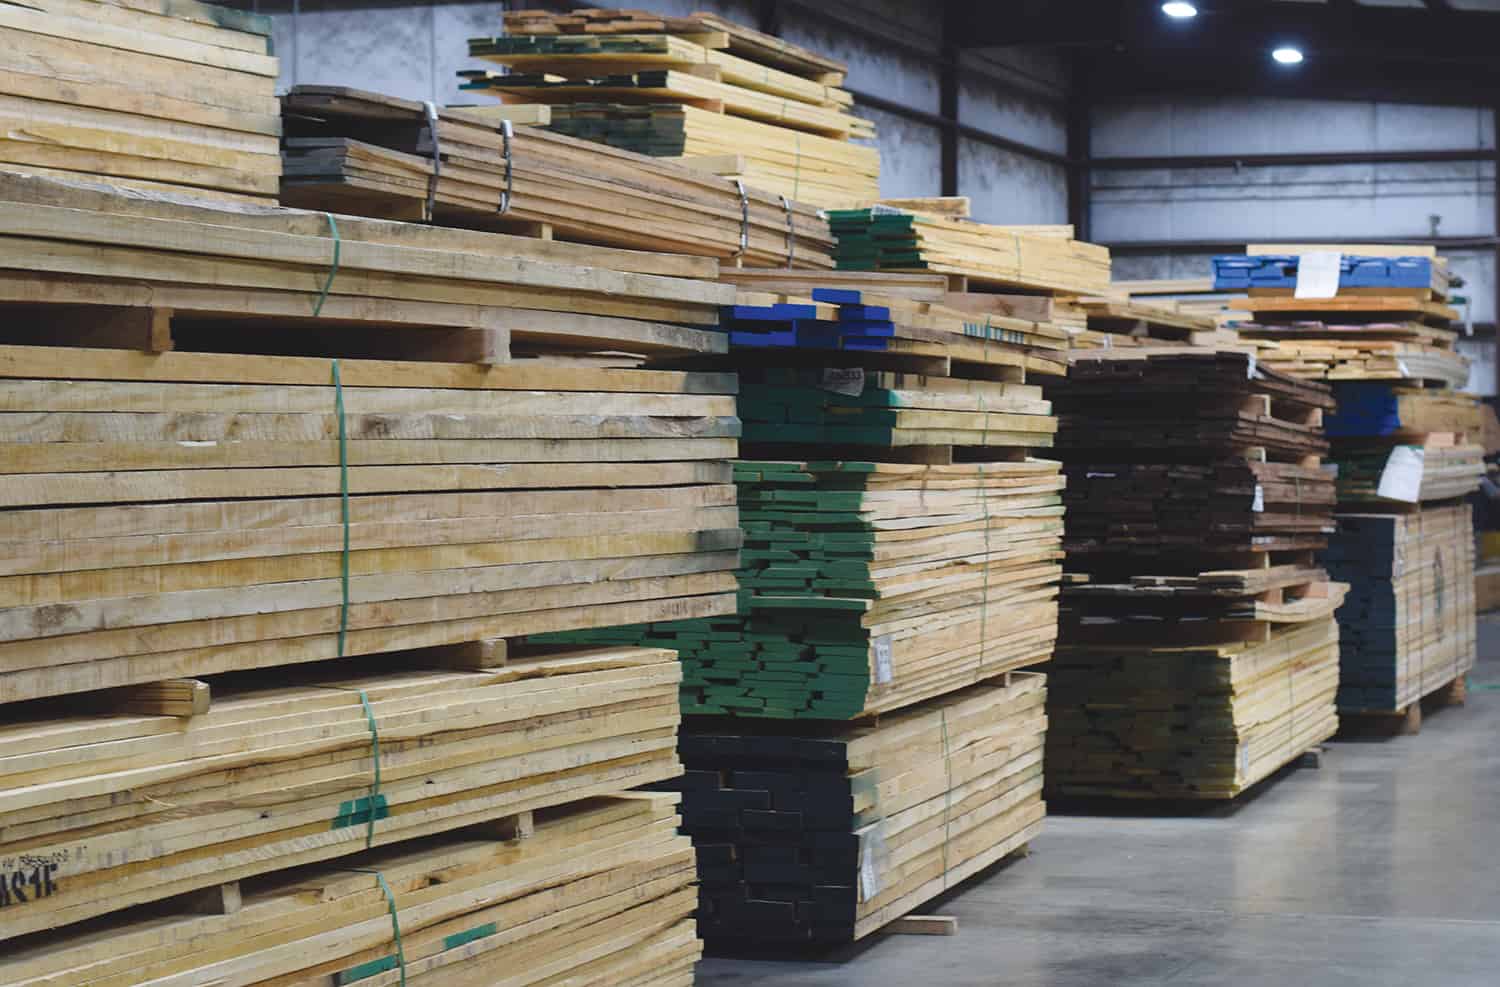 Moving Volume Lumber Despite Challenges At Peach State Lumber Products 4